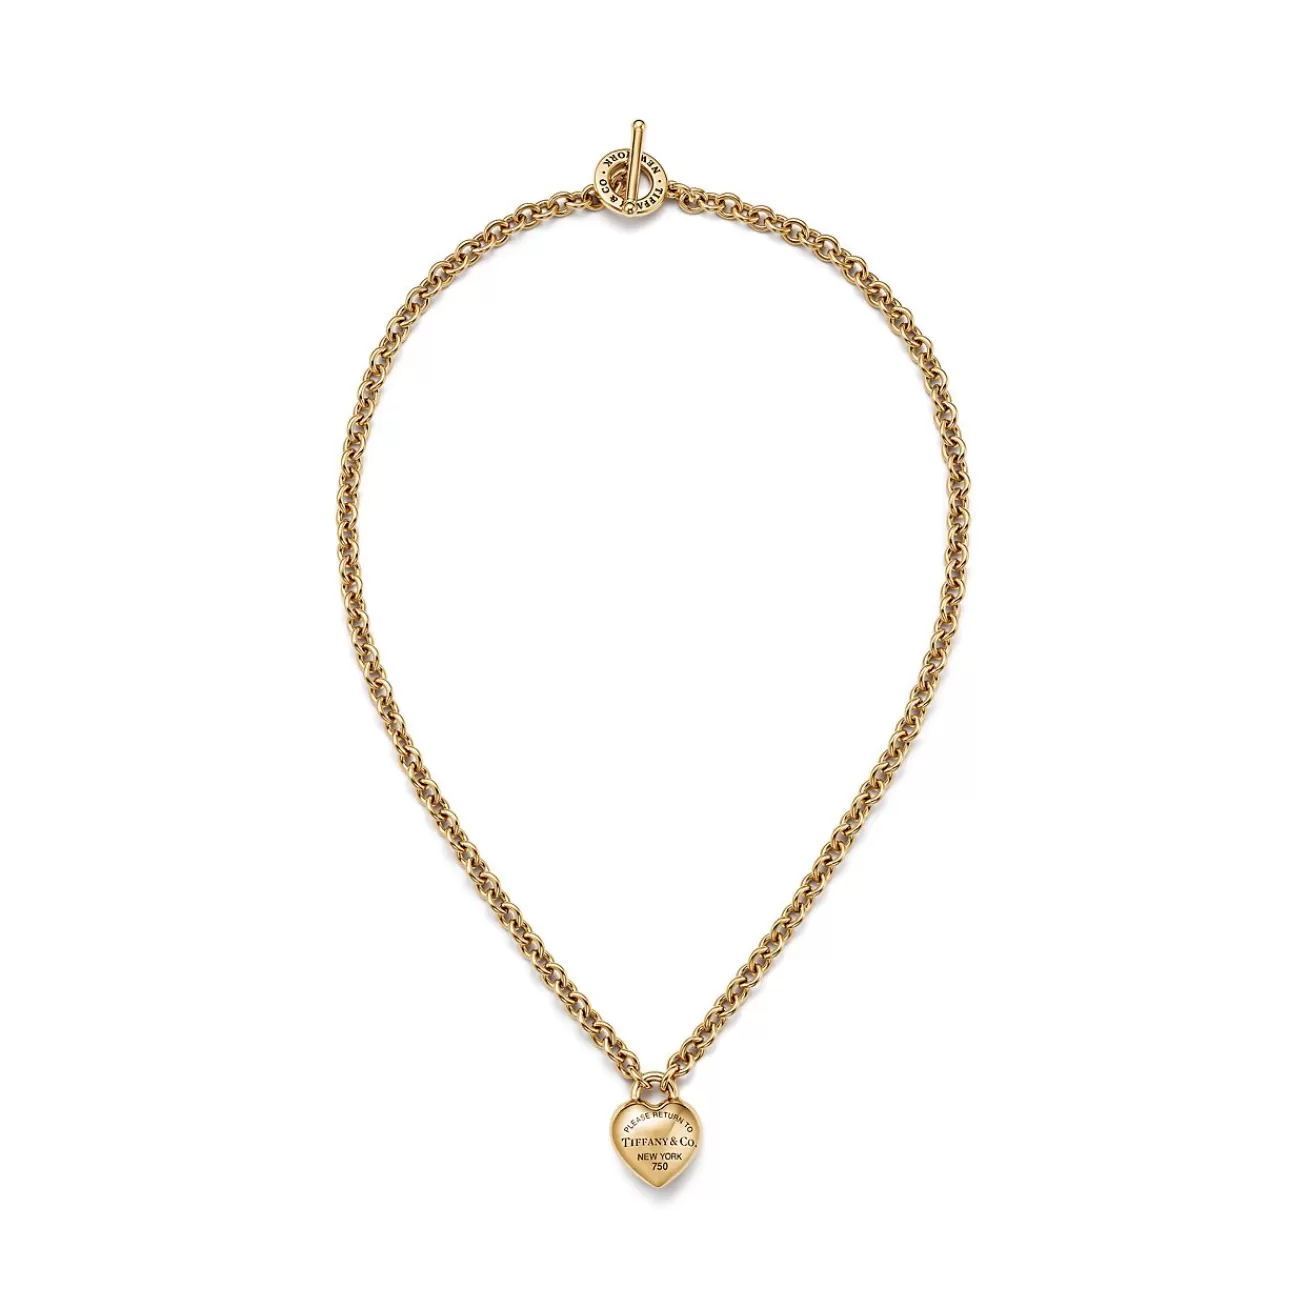 Tiffany & Co. Return to Tiffany® Full Heart Pendant in Yellow Gold | ^ Necklaces & Pendants | New Jewelry